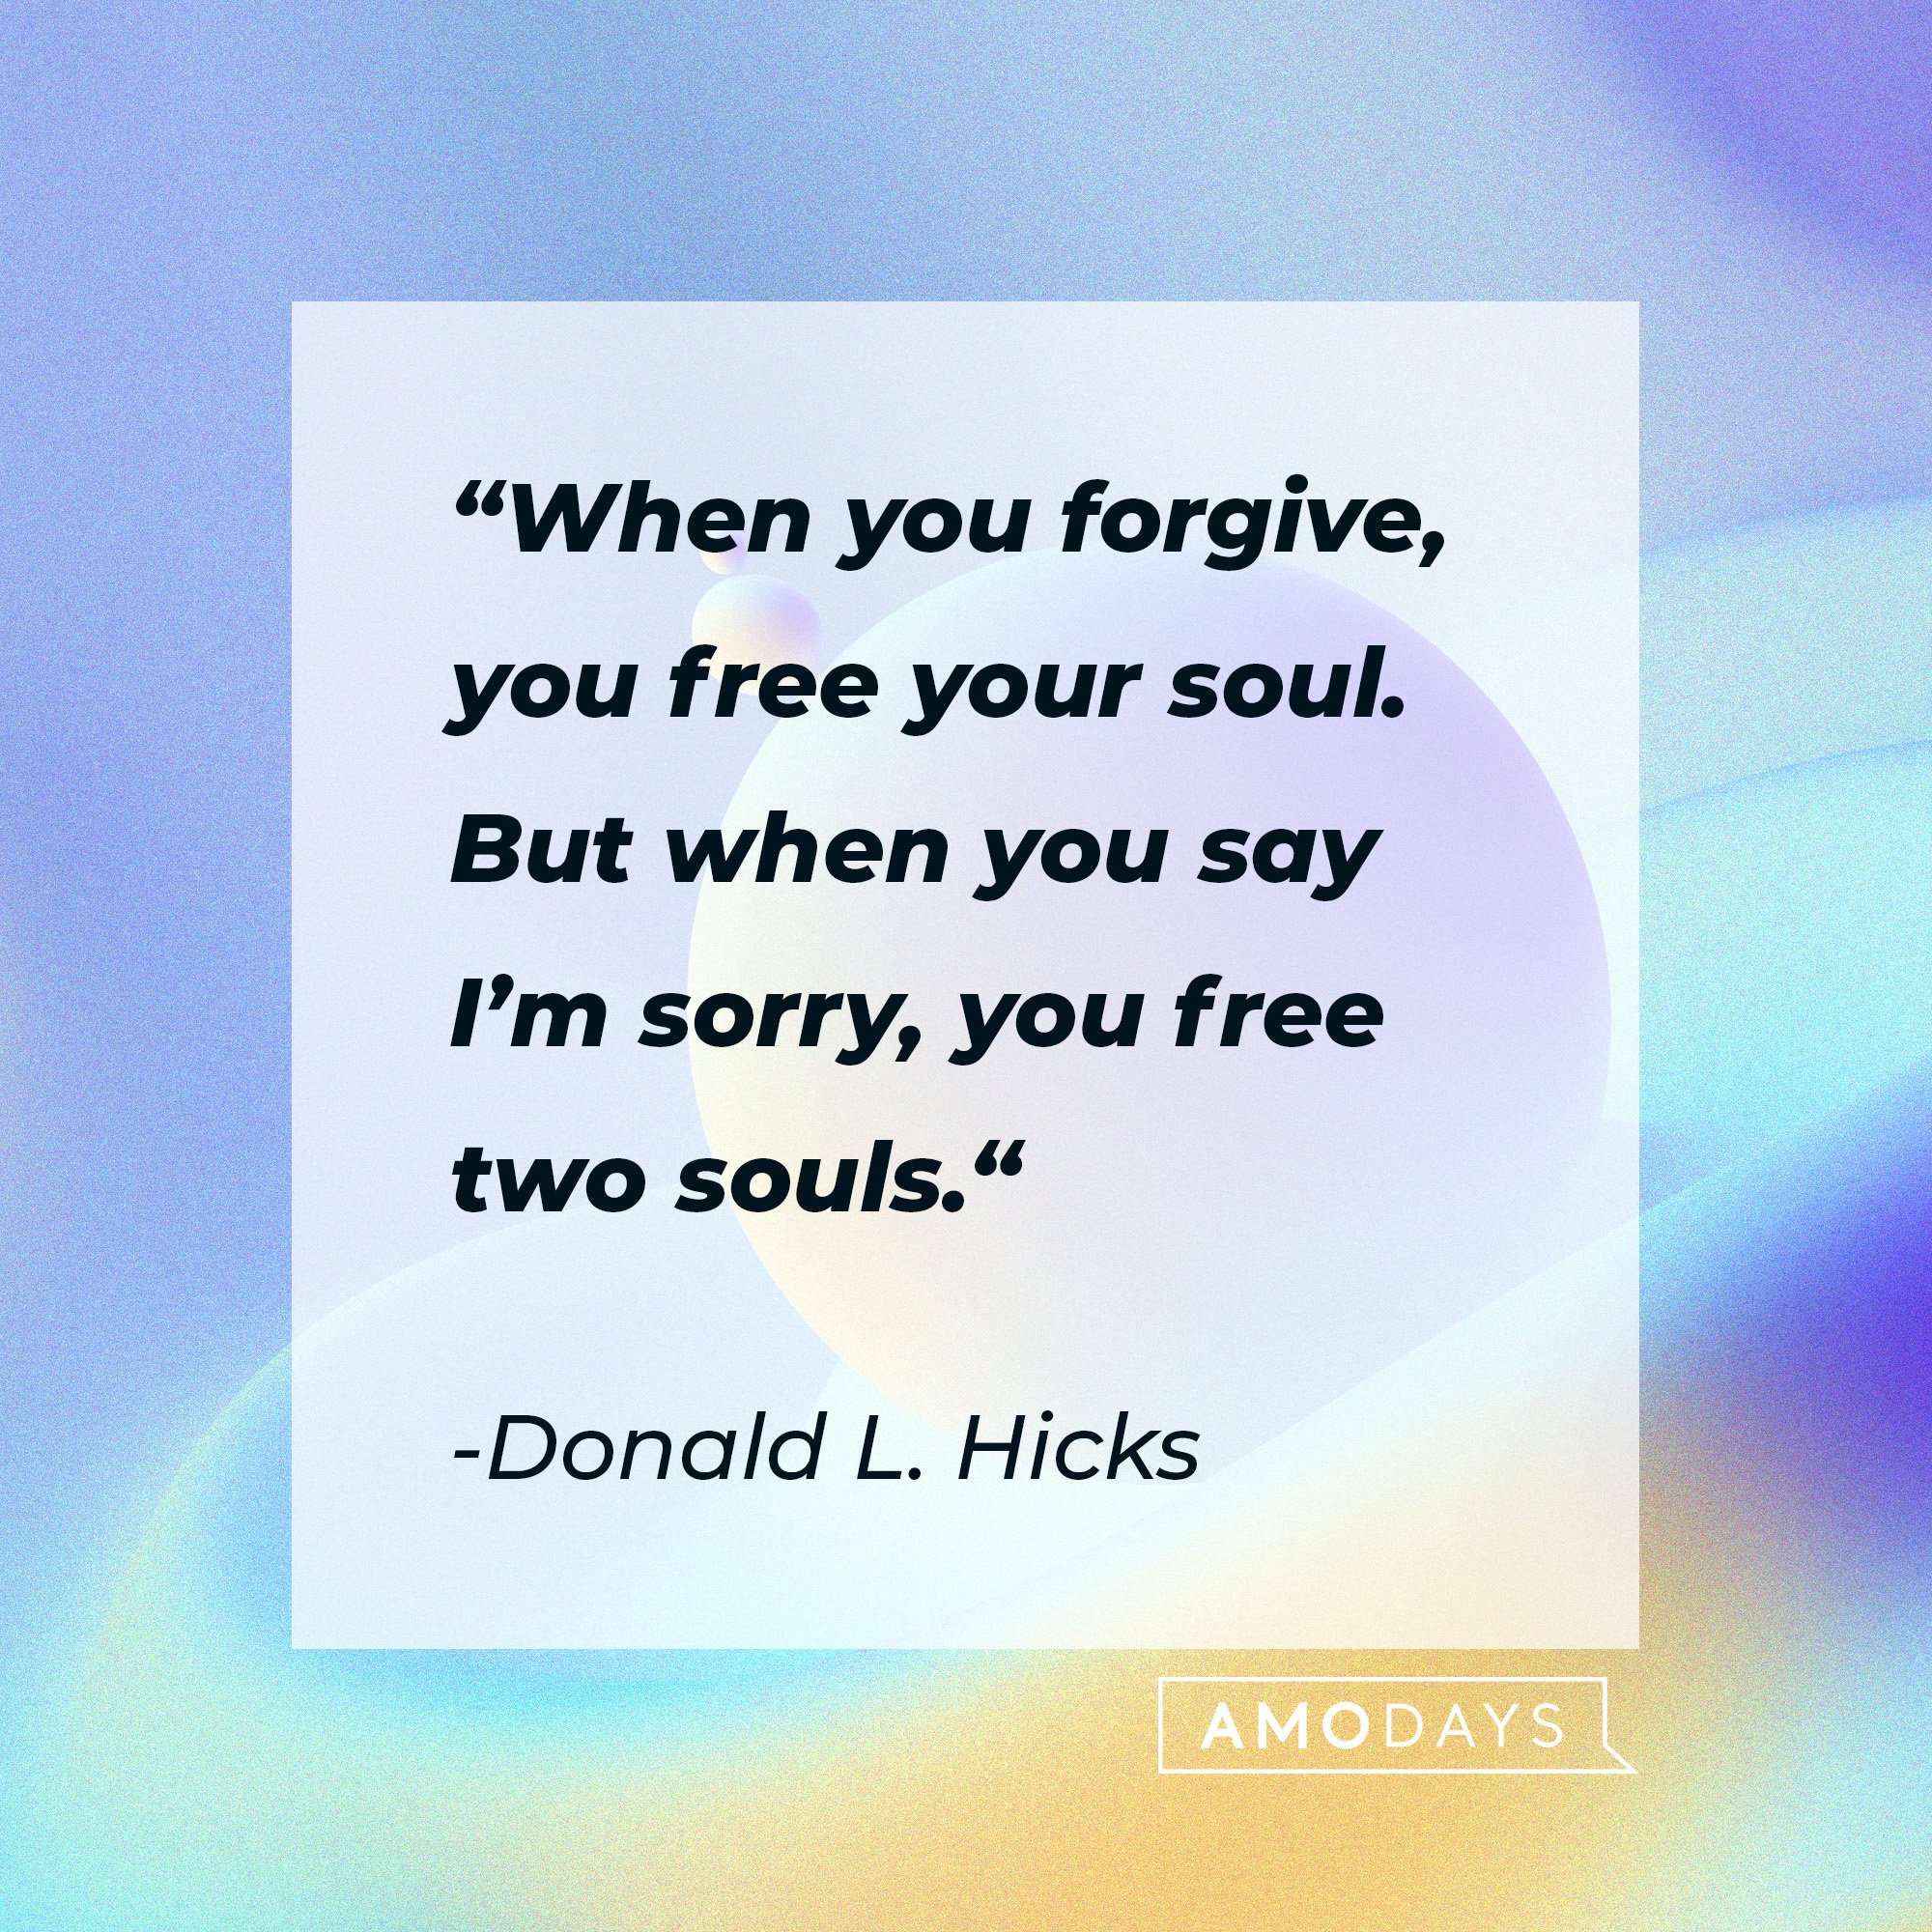 Donald L. Hicks's quote: “When you forgive, you free your soul. But when you say I’m sorry, you free two souls.“ | Image: AmoDays